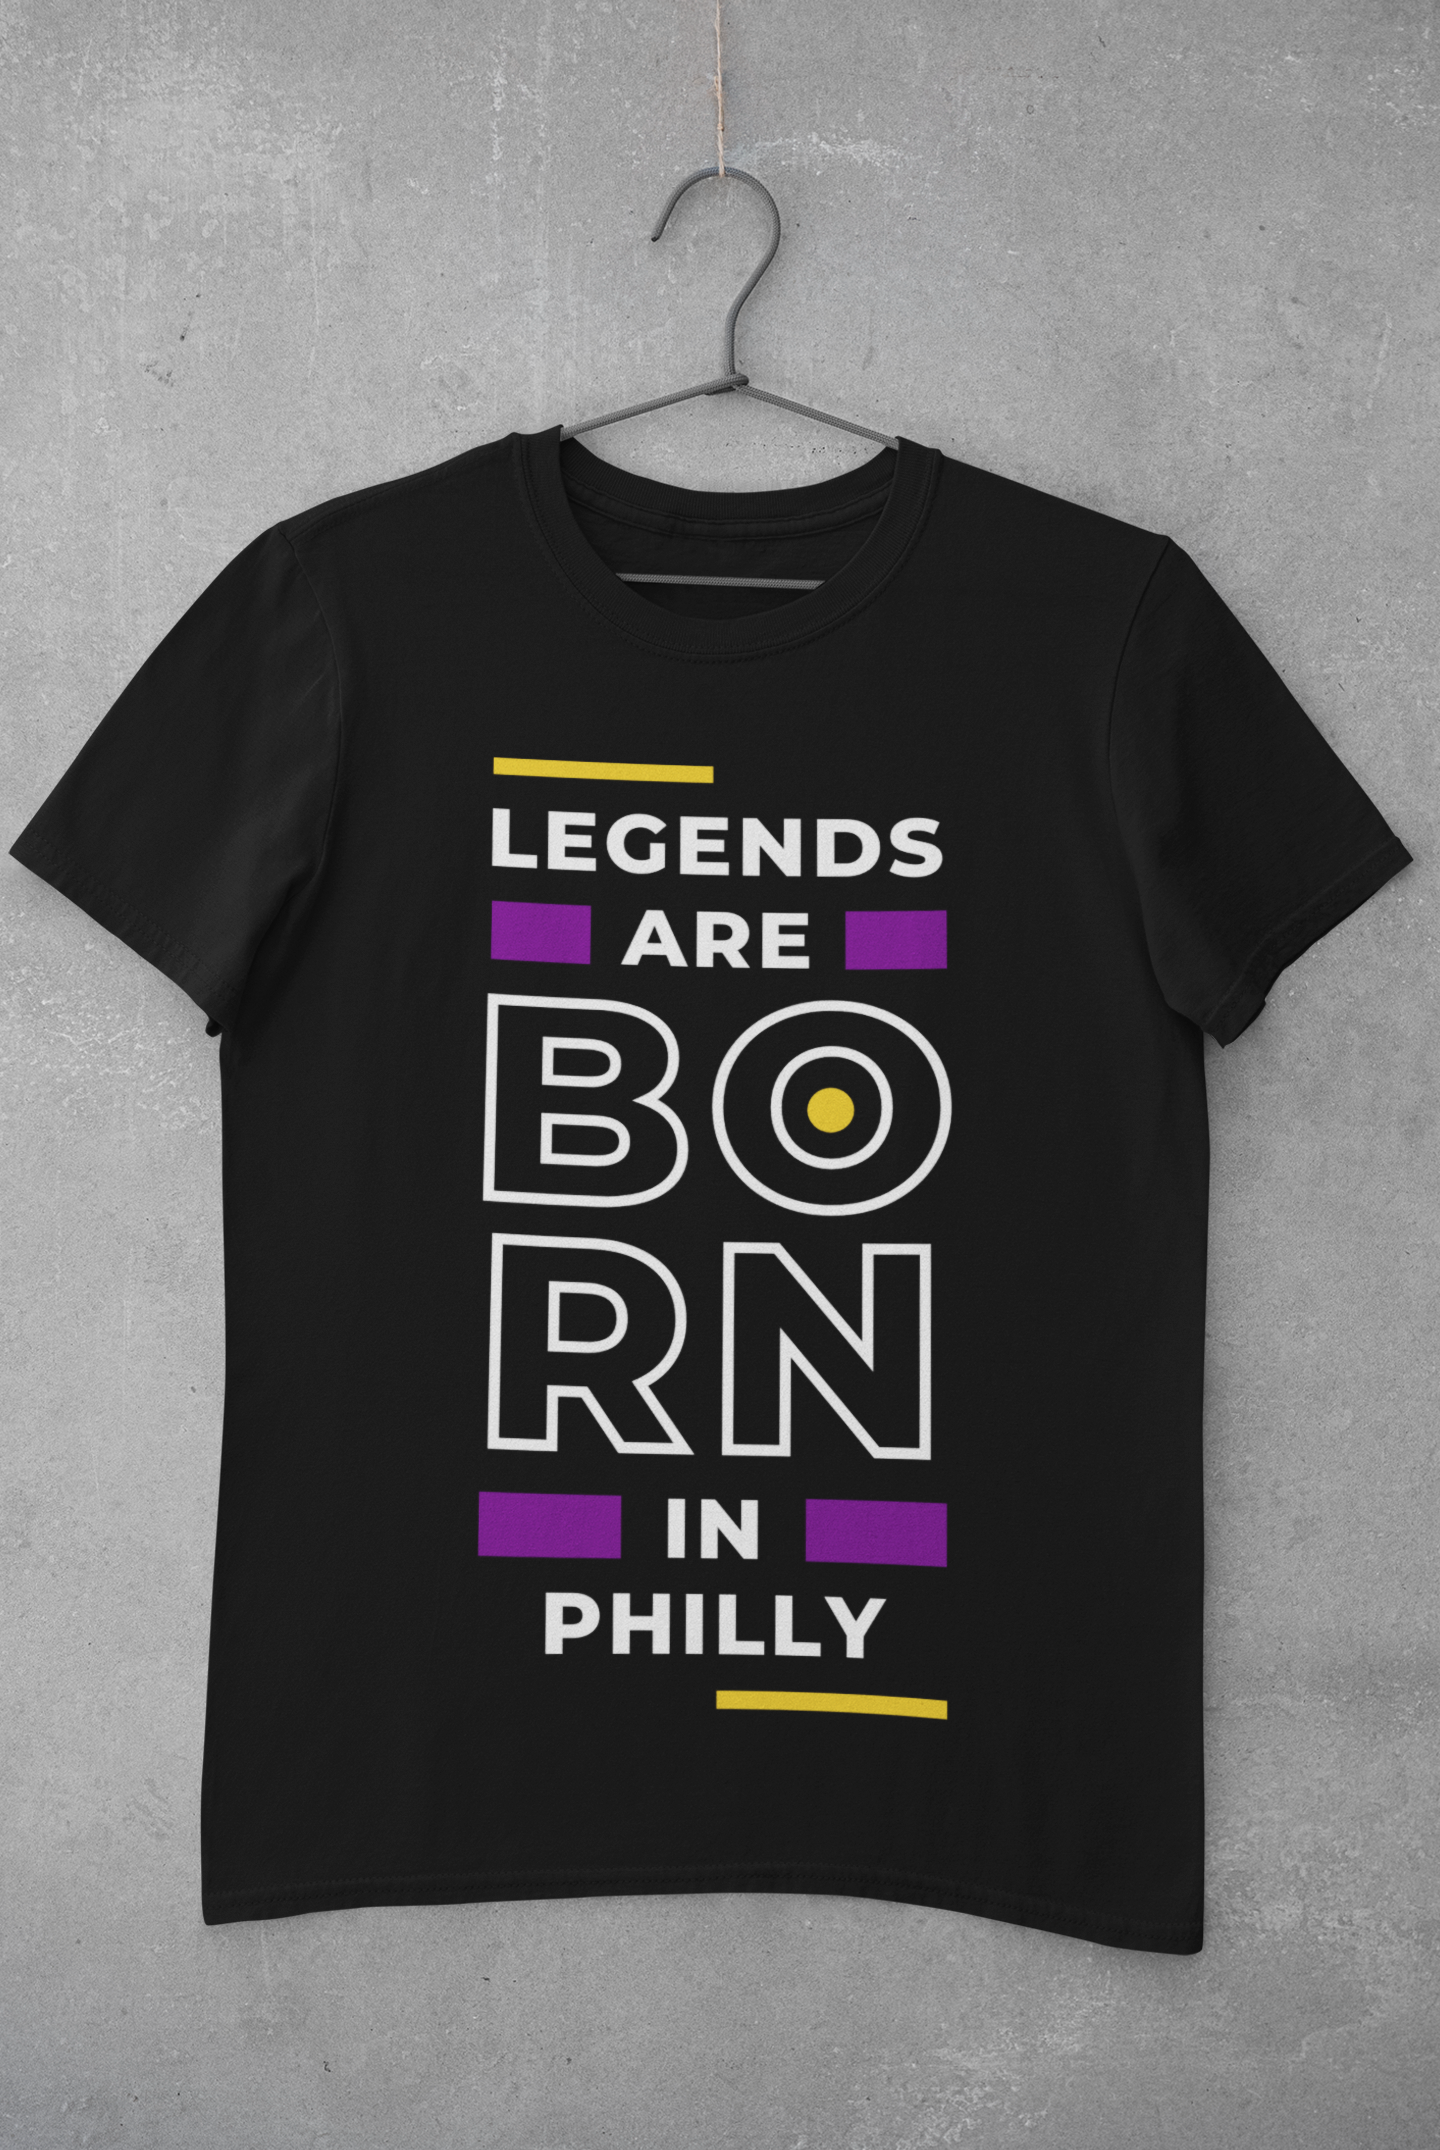 Legends are born in Philly